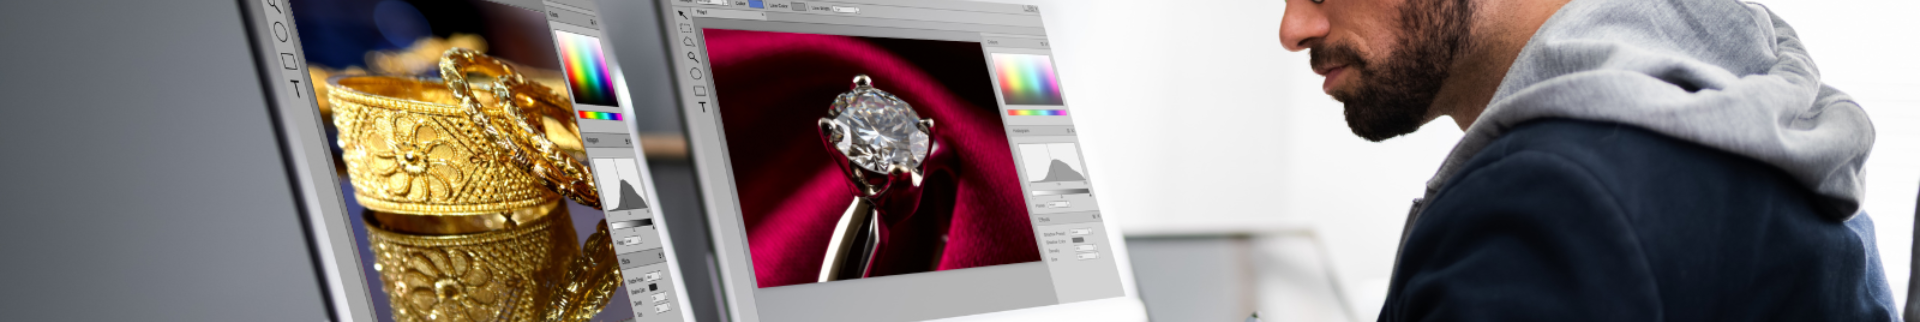 Diamond Jewelry Photo Editing Services For Online Business